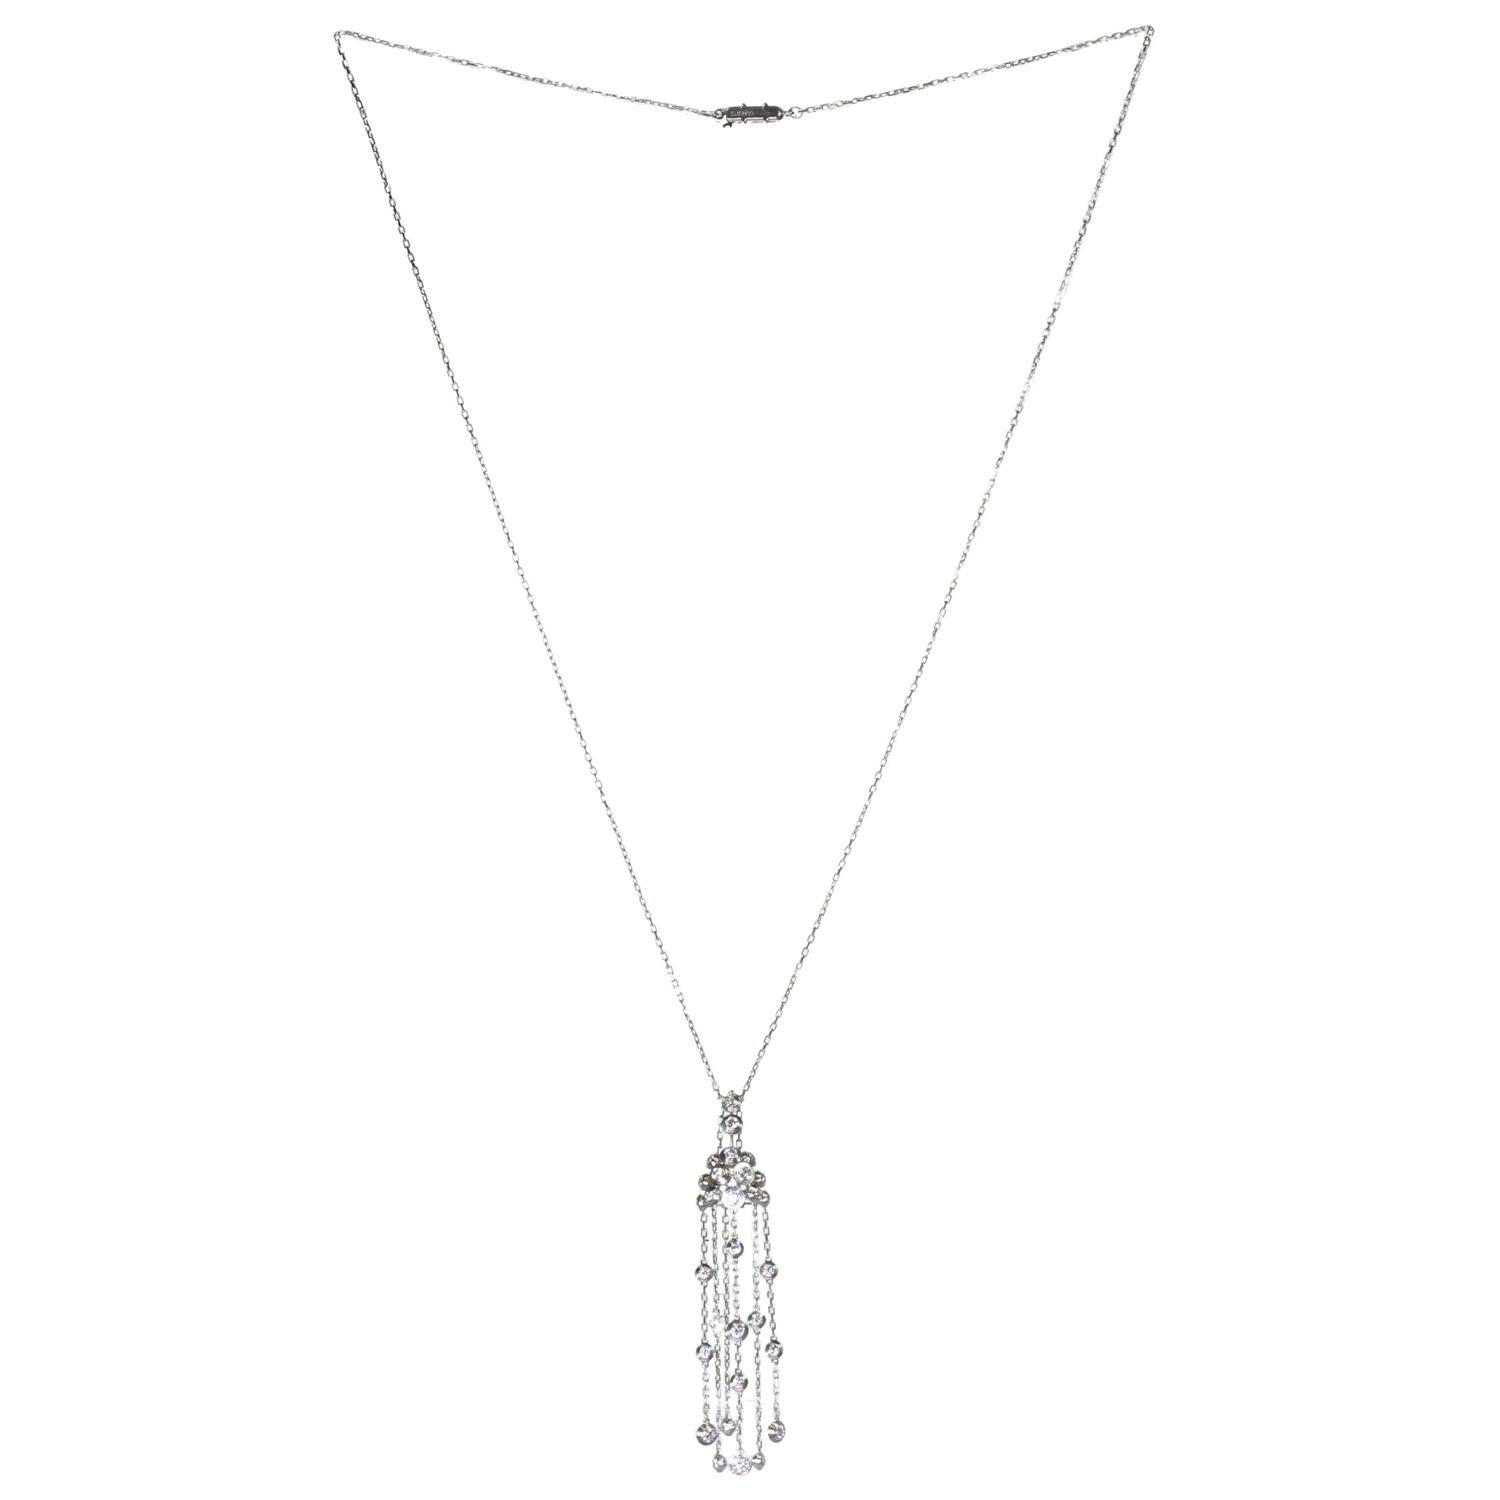 This exquisite Cartier long chain necklace is crafted in 18k white gold and features tassel pendant bezel-set with 30 D-E-F VVS1-VVS2 brilliant cut-round diamonds. Made in France circa 2011. Measurements: 0.55